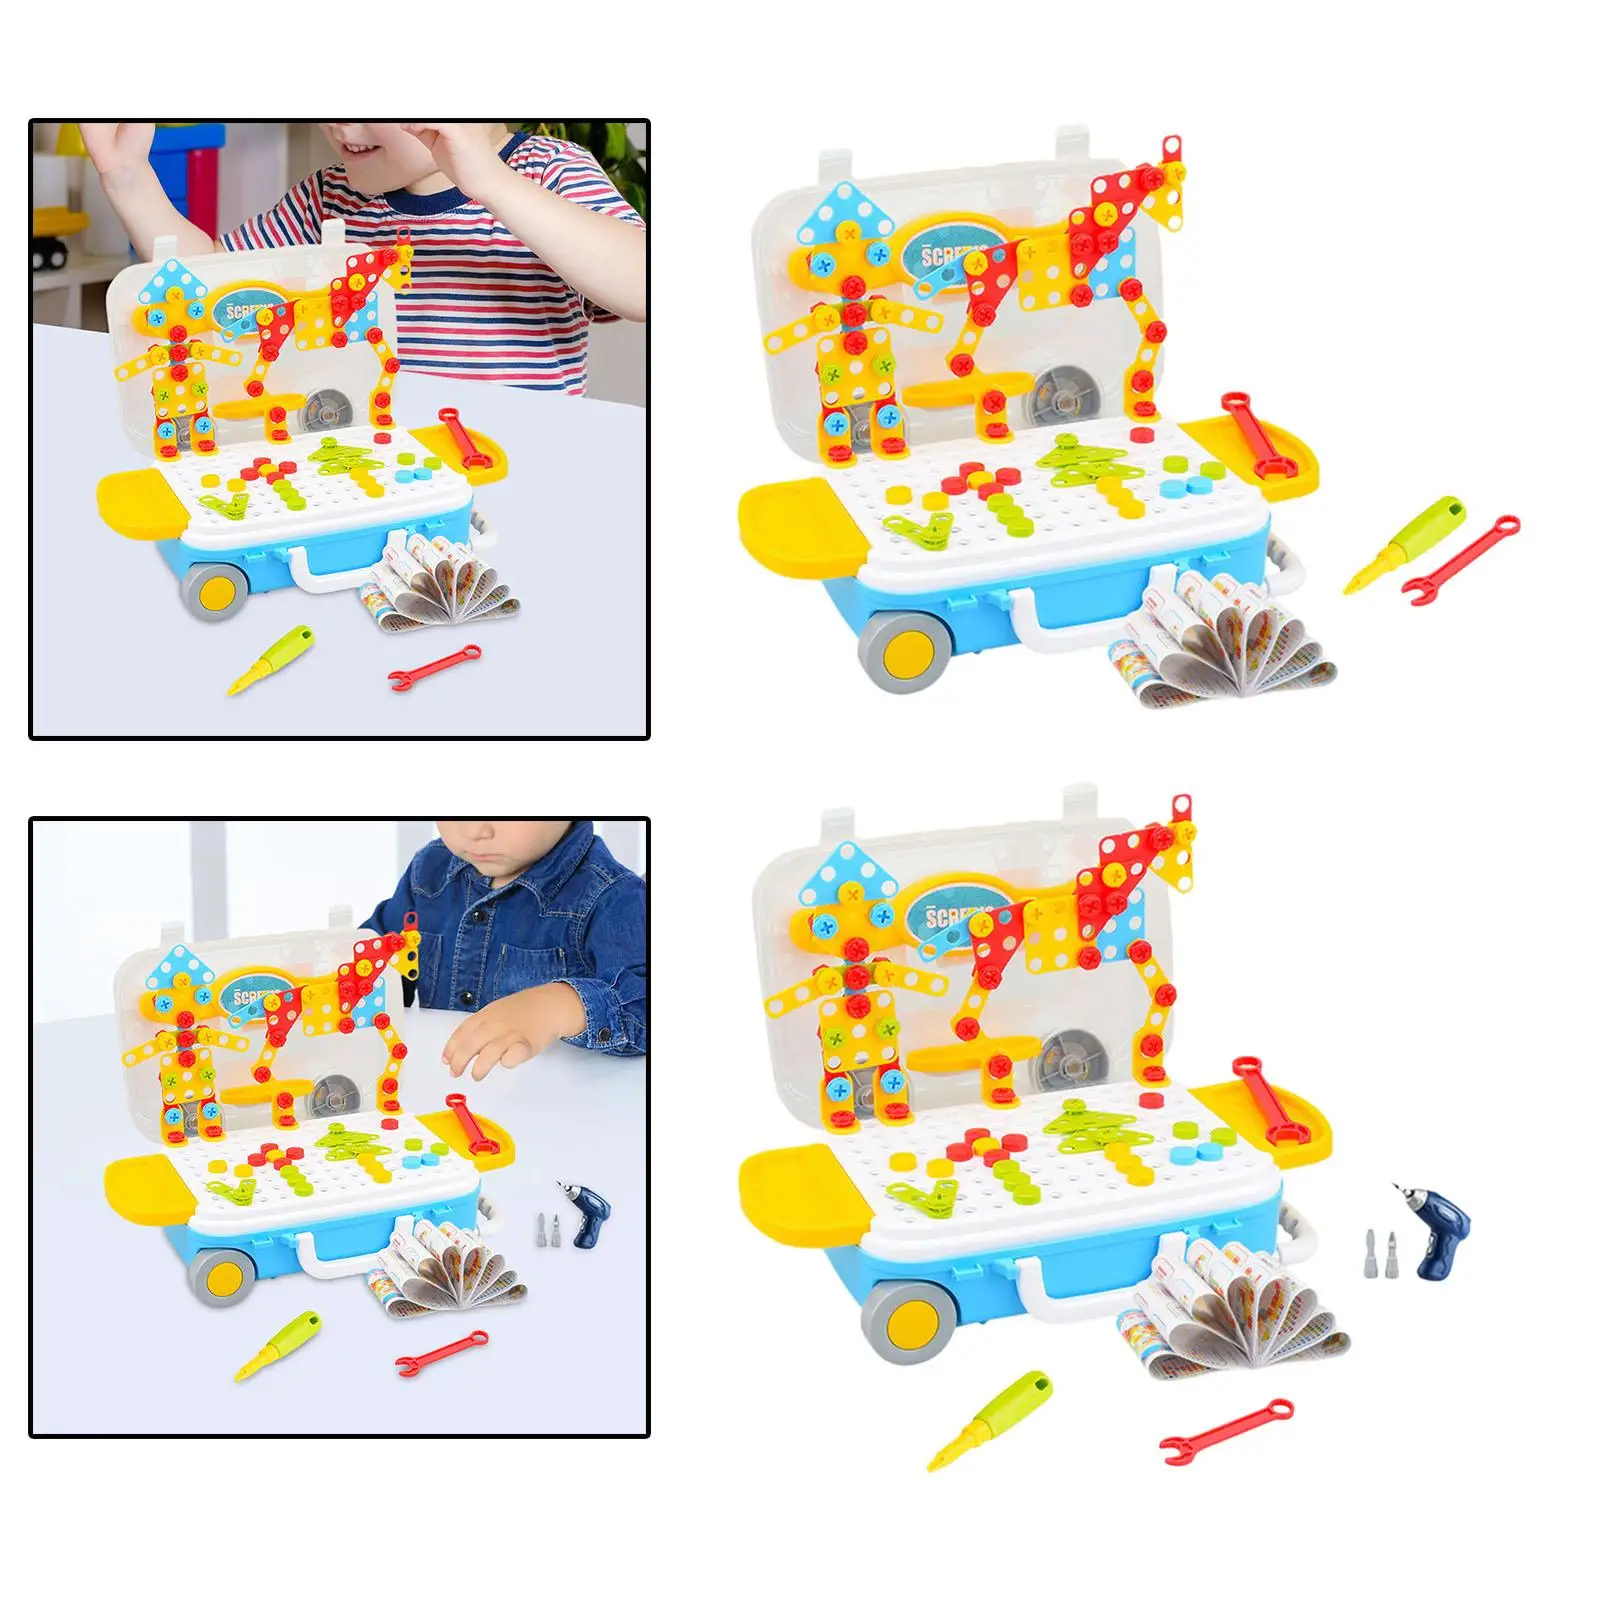 Design and Drill Toy Engineering Building Kits Kids Nut and Bolts Toy for